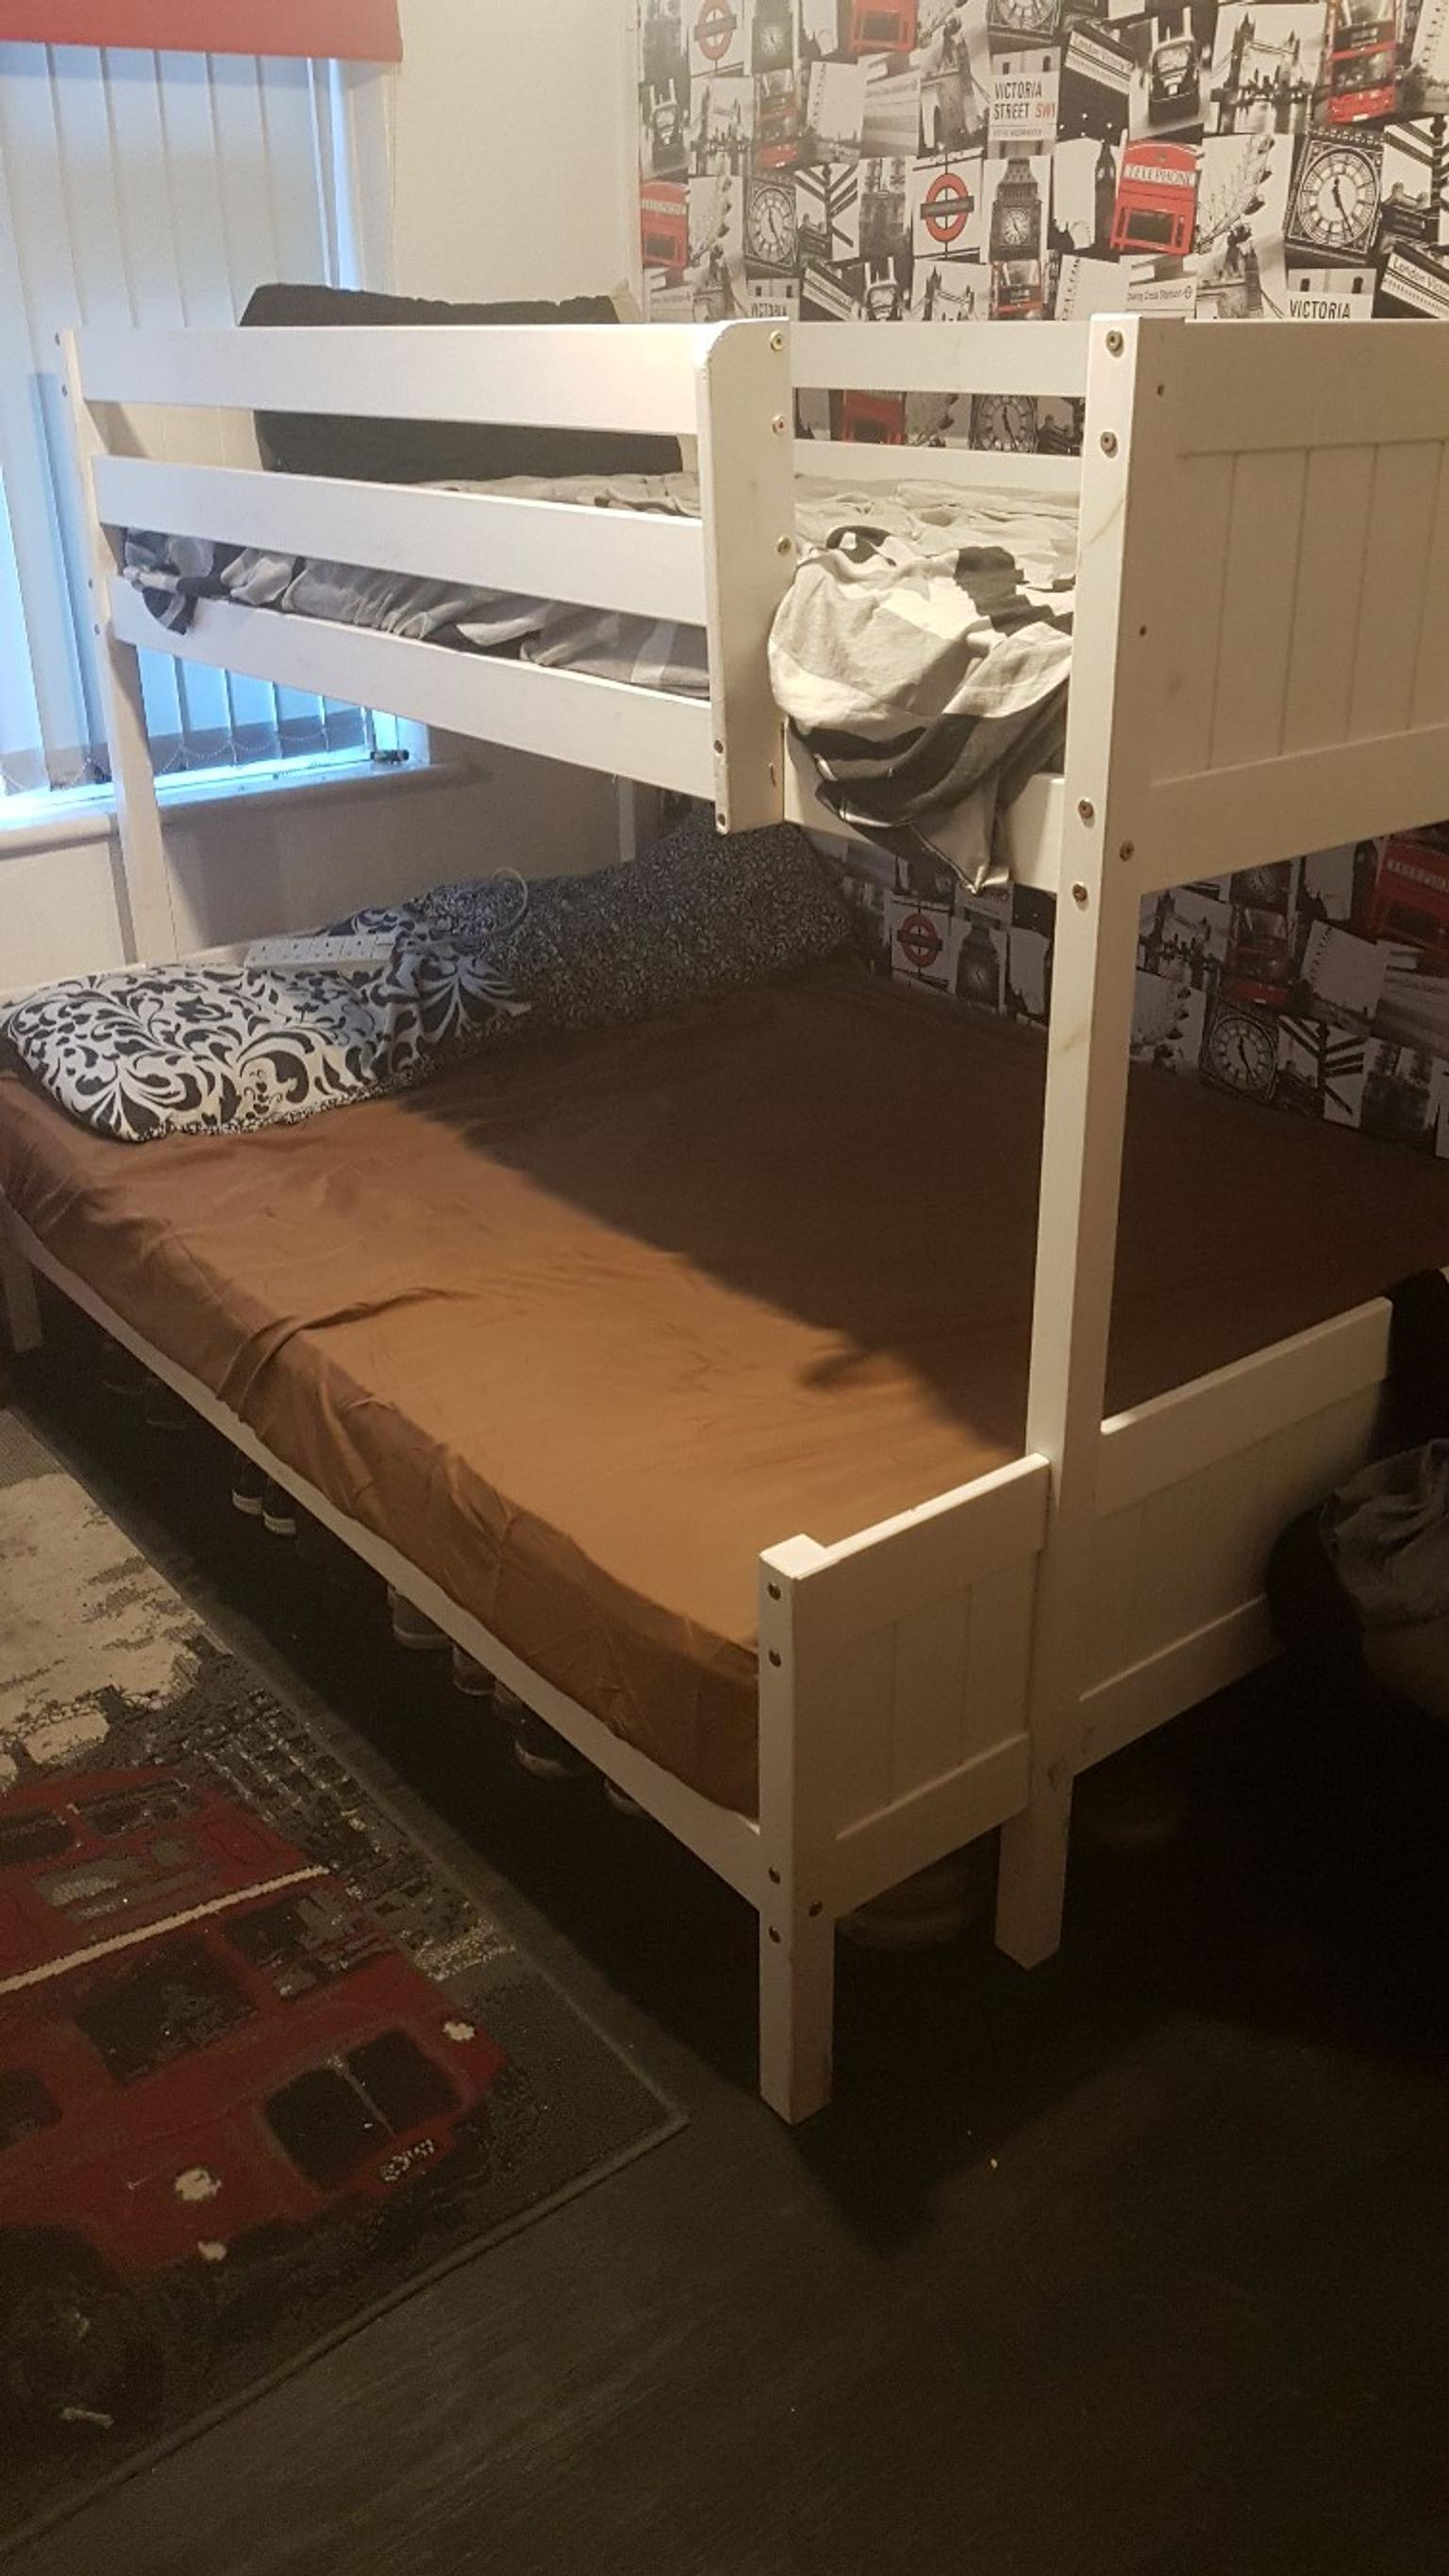 Ikea Bunk Bed In B31 Birmingham For, Bunk Bed Double And Single Ikea